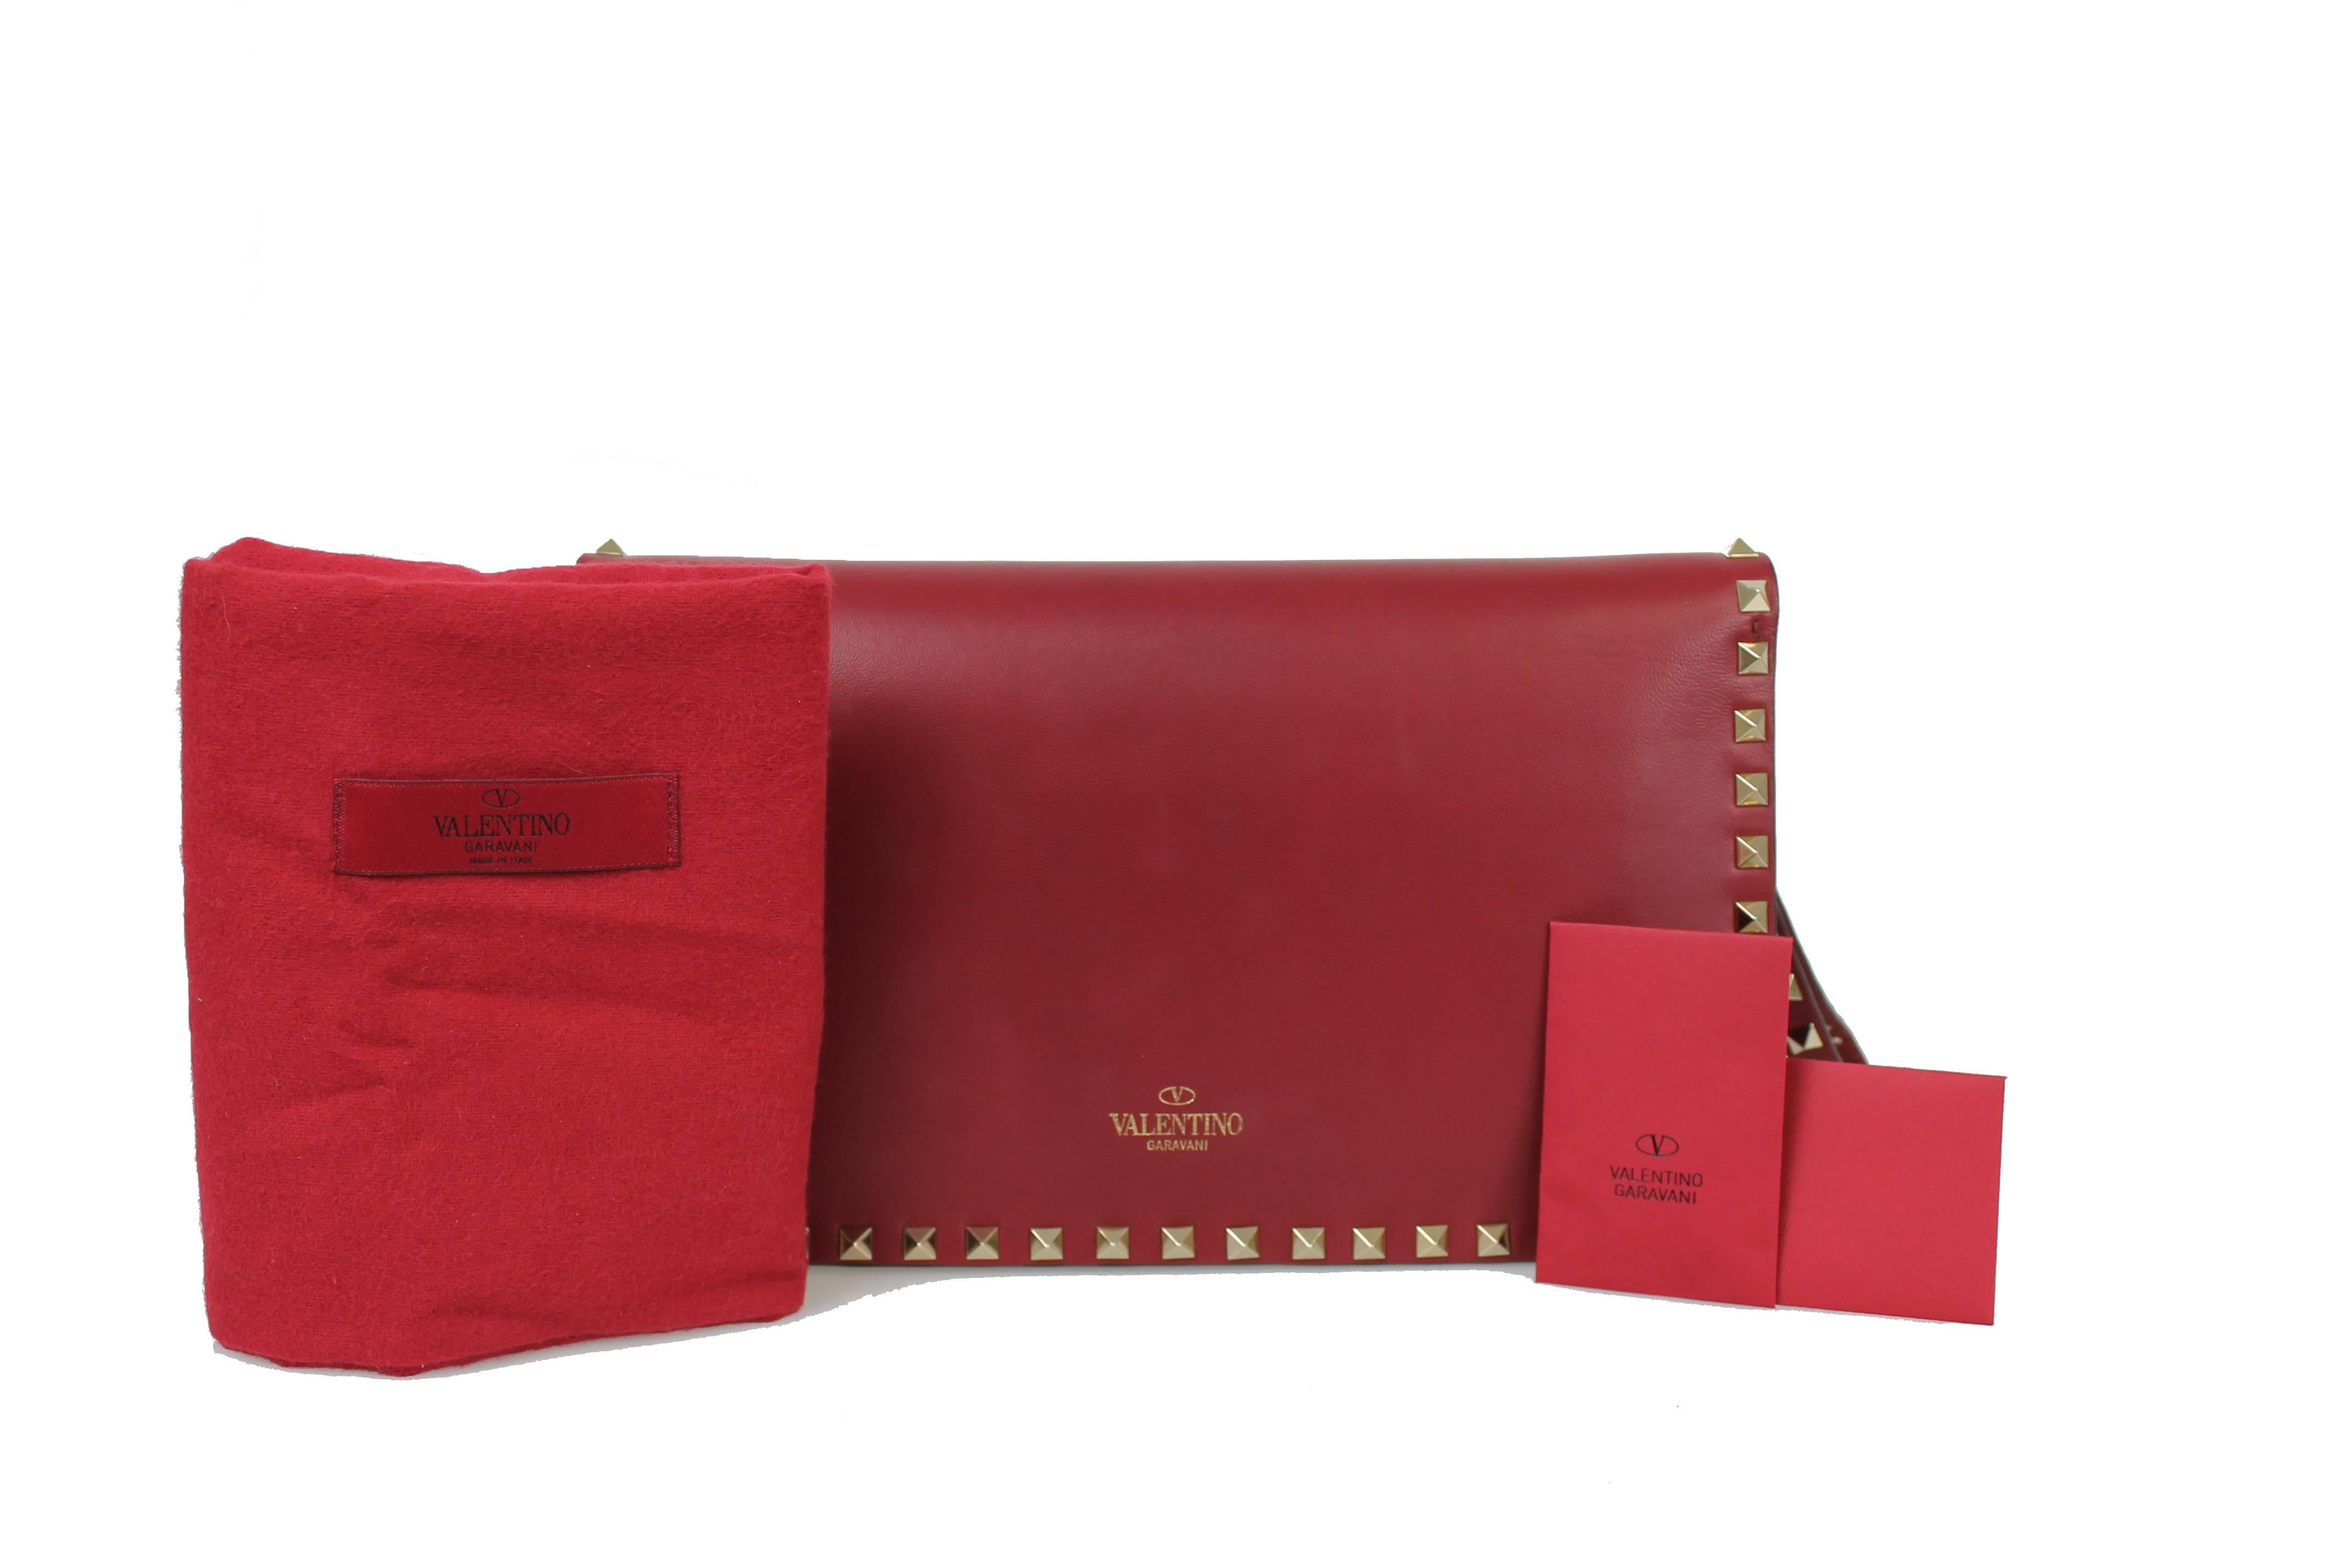 VALENTINO Rockstud Leather Red Clutch For Sale 4